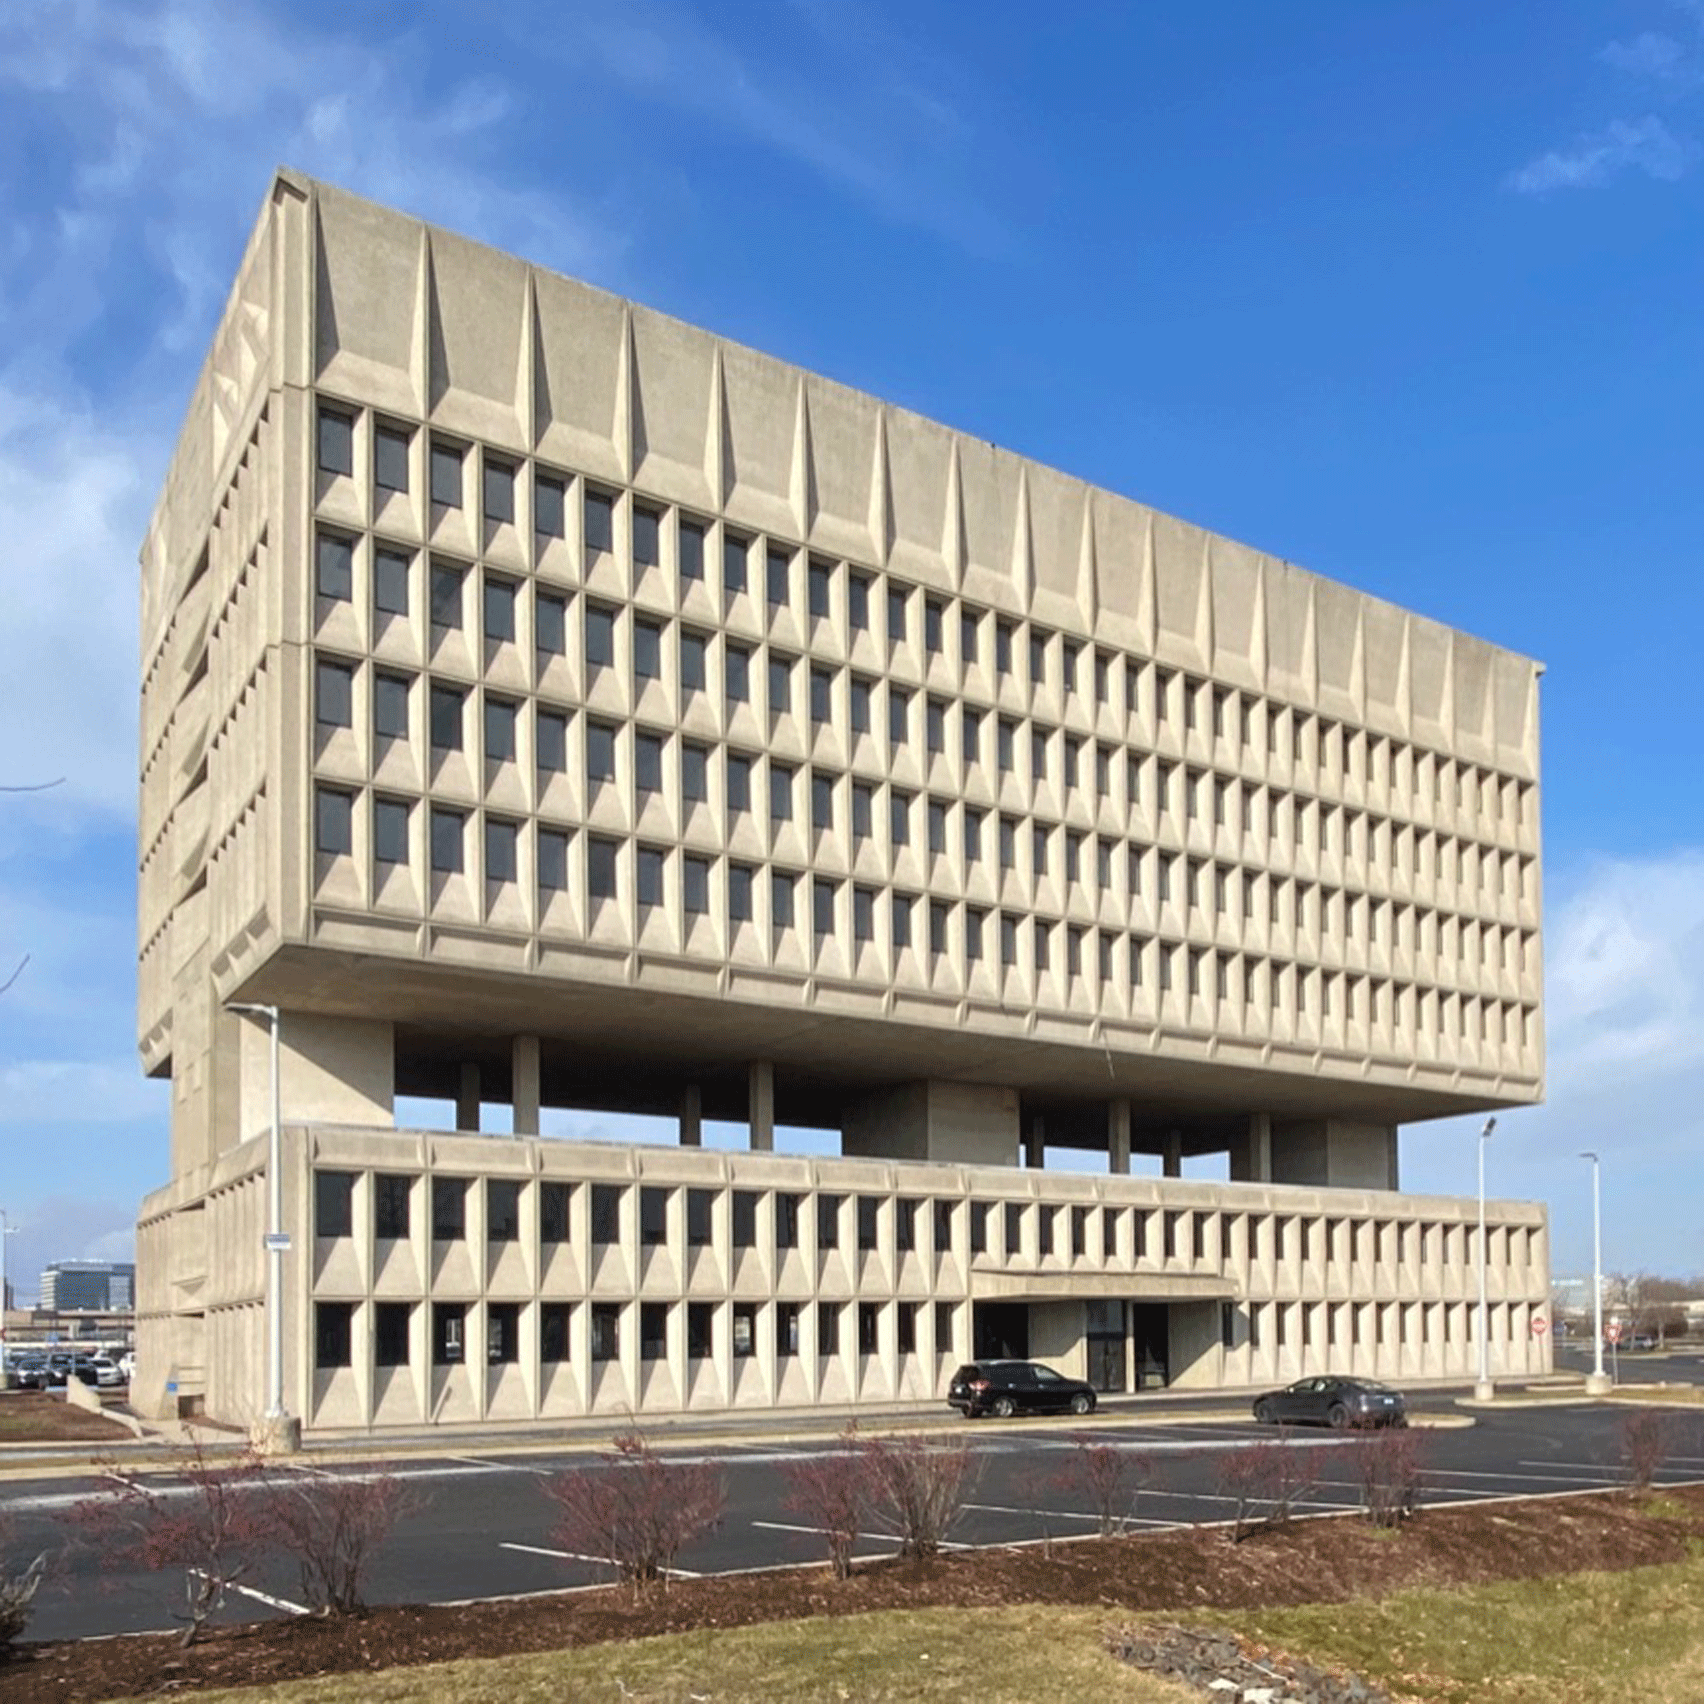 Brutalist Marcel Breuer building in Connecticut sold to become hotel